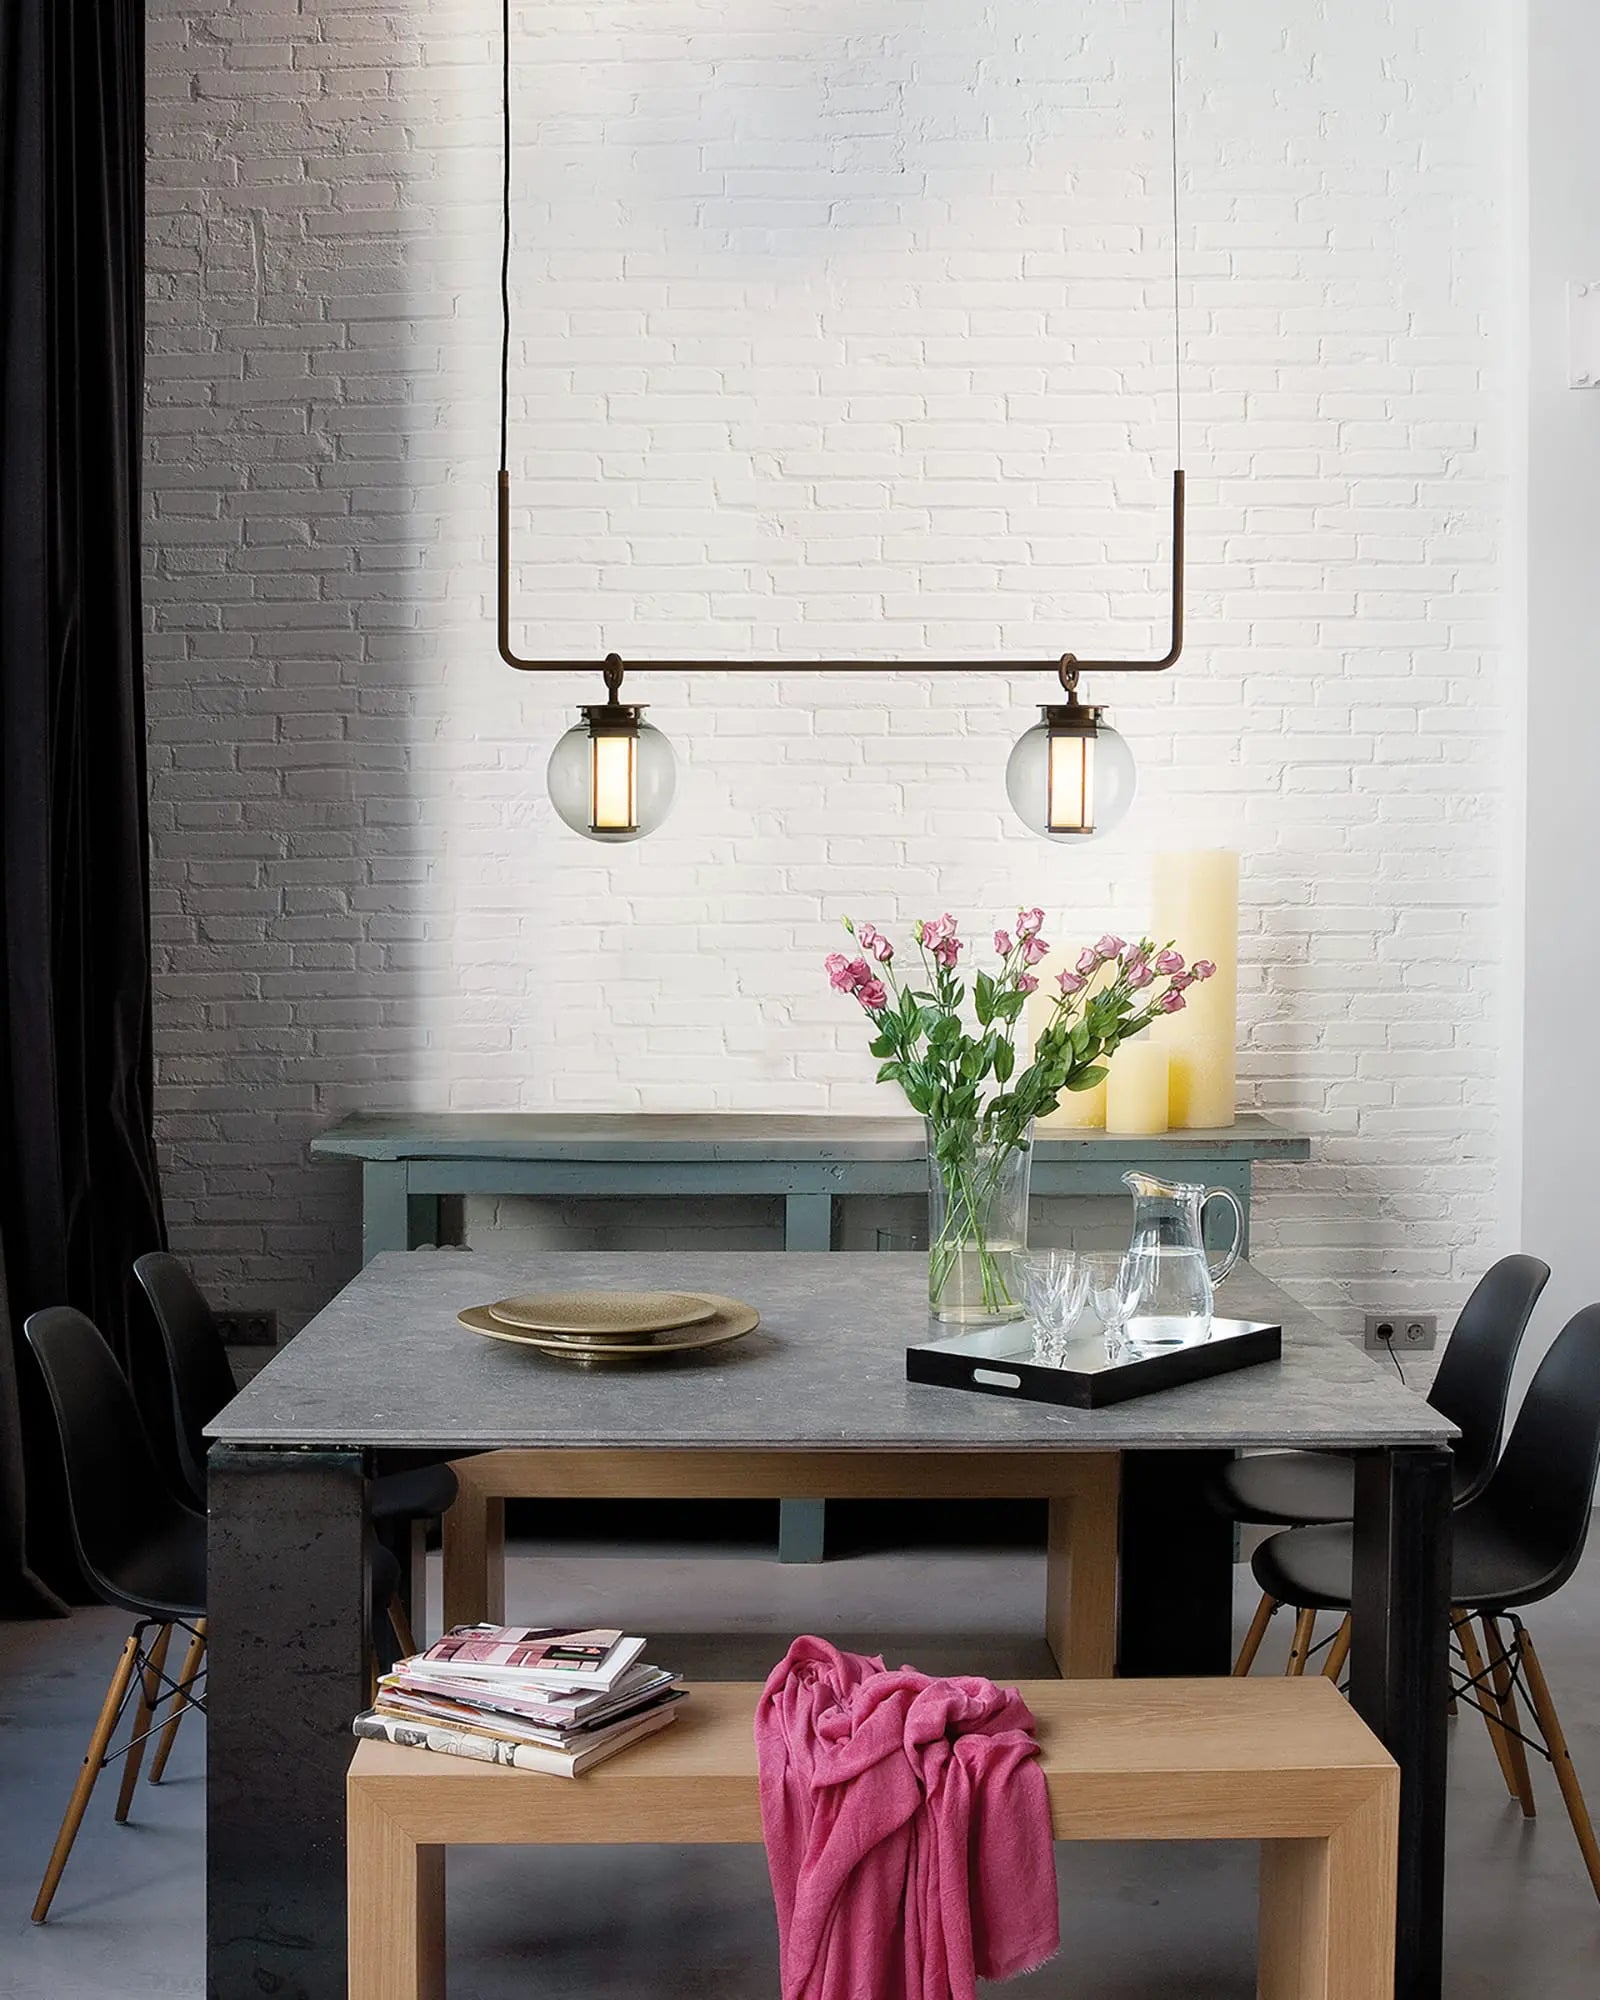 Bai elegant chandelier inspired by Chinese lanterns 2 lights above a dining table